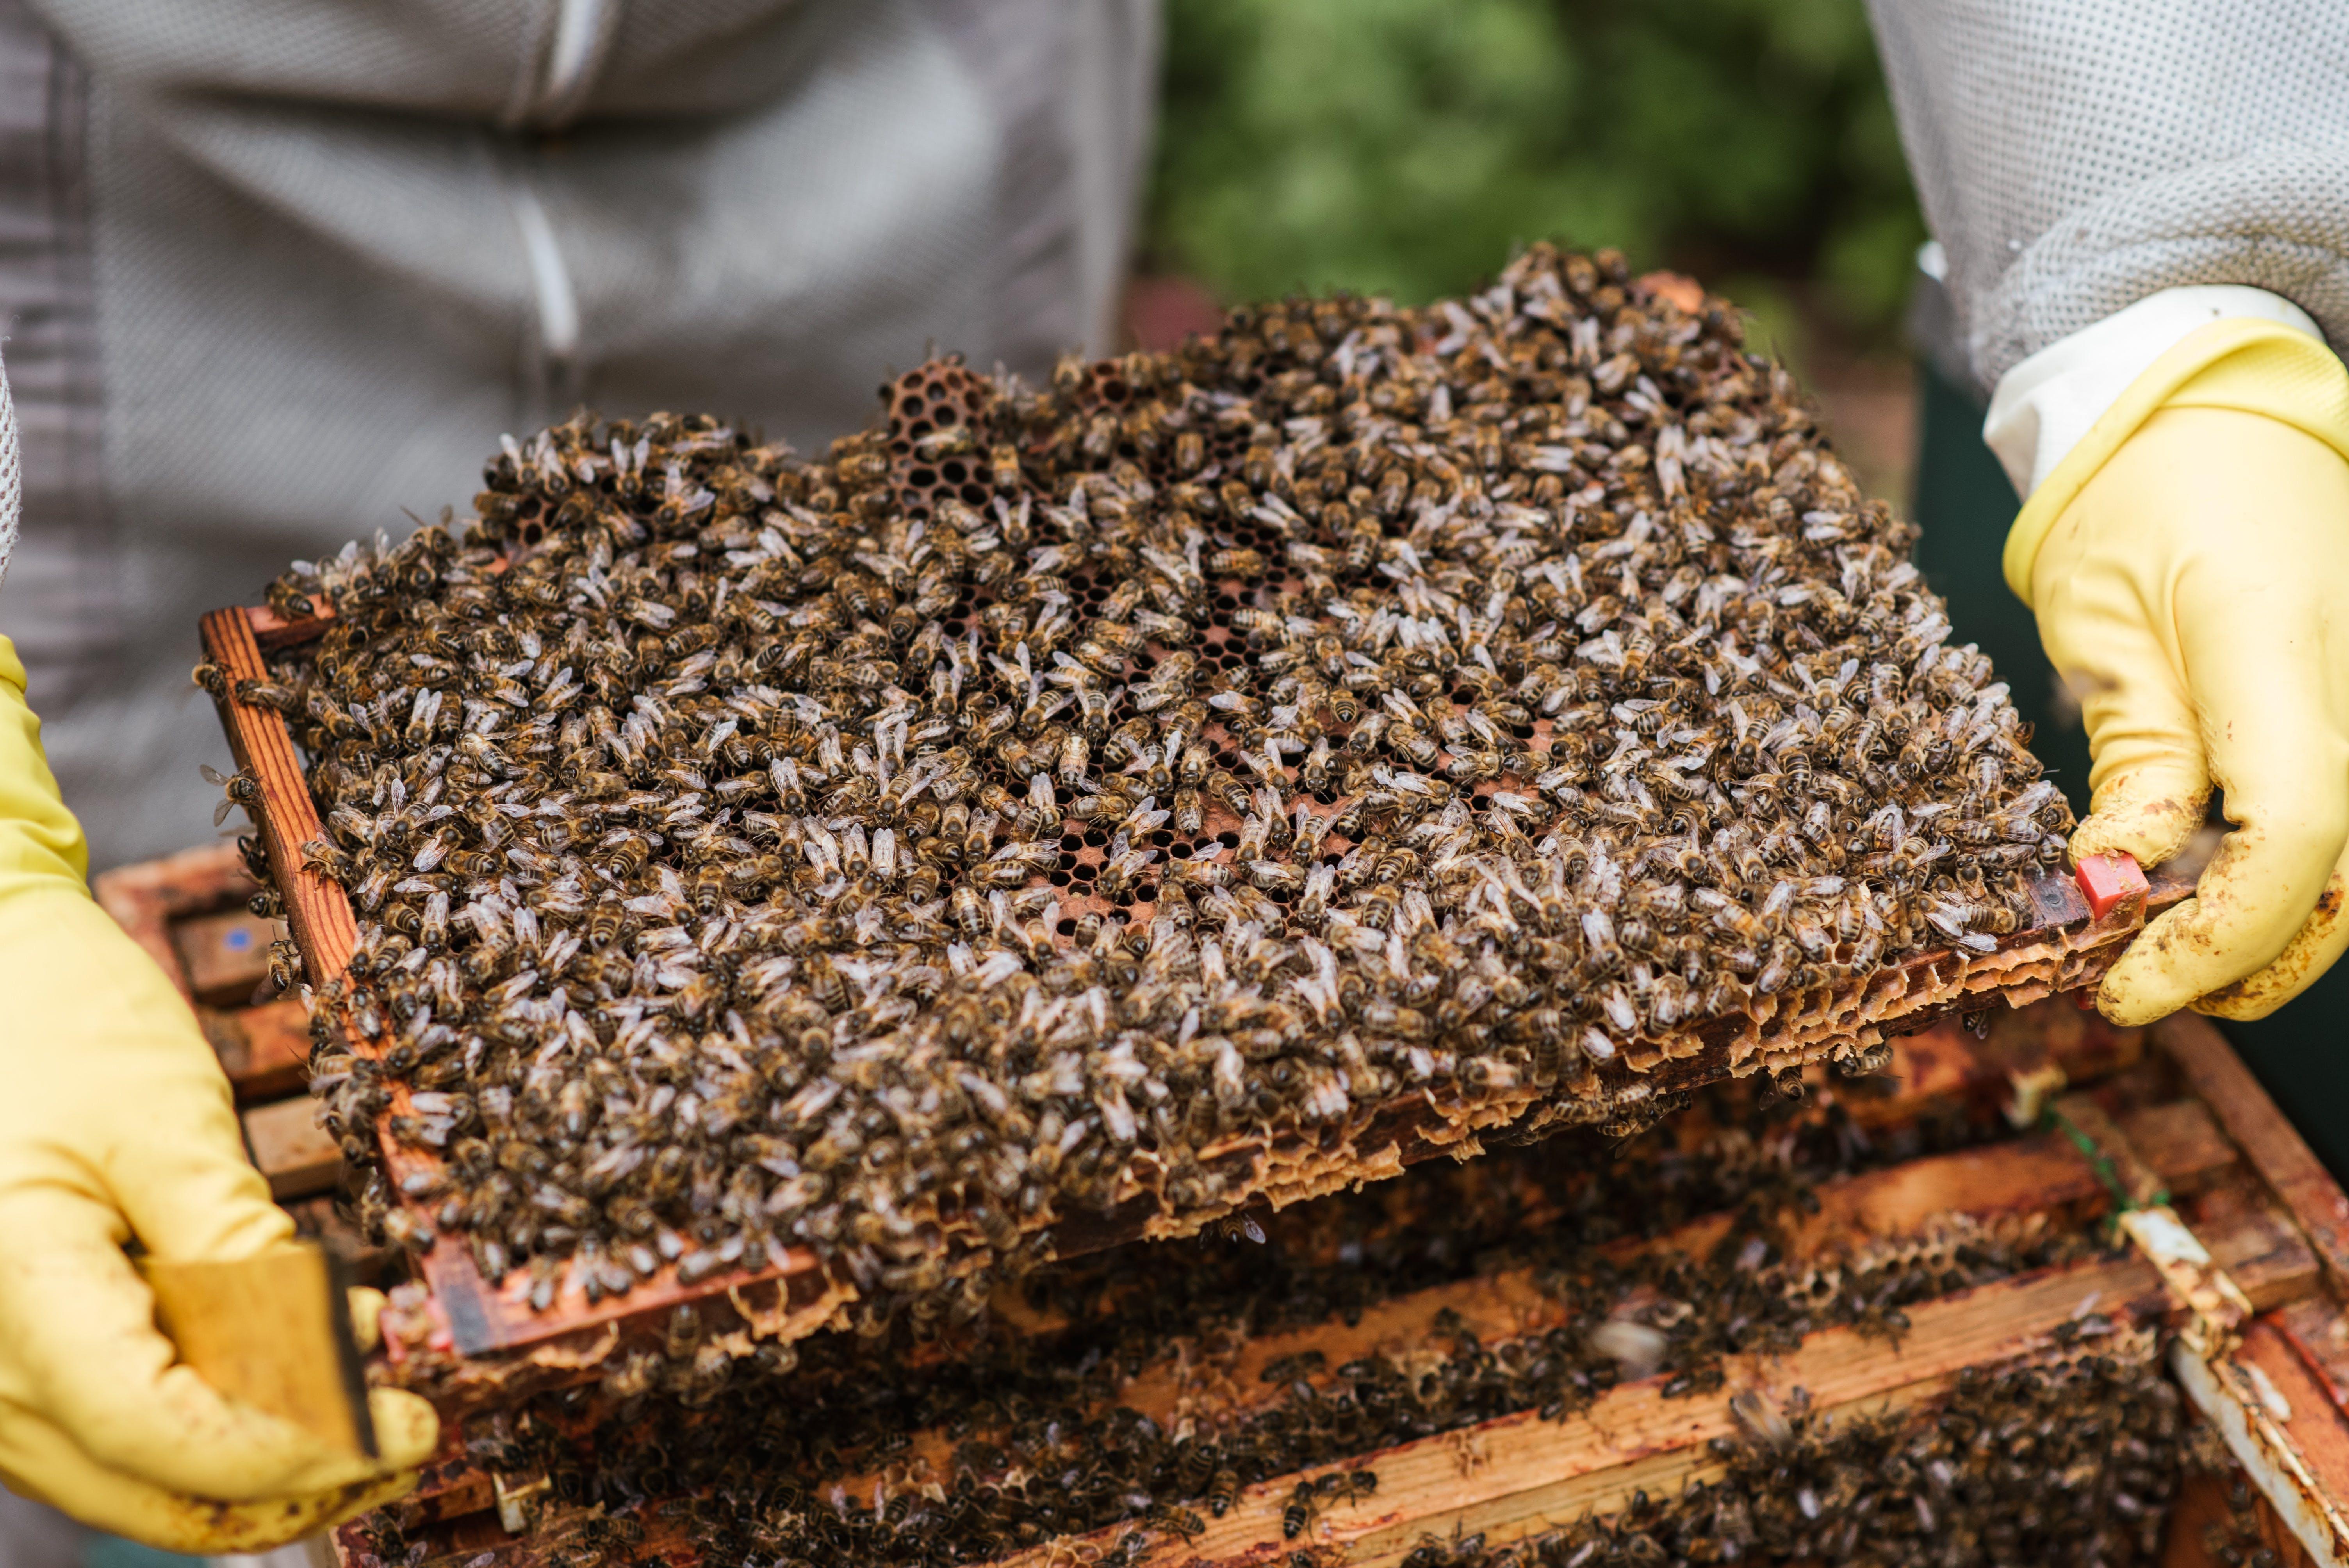 What time of day is best to kill bees? 